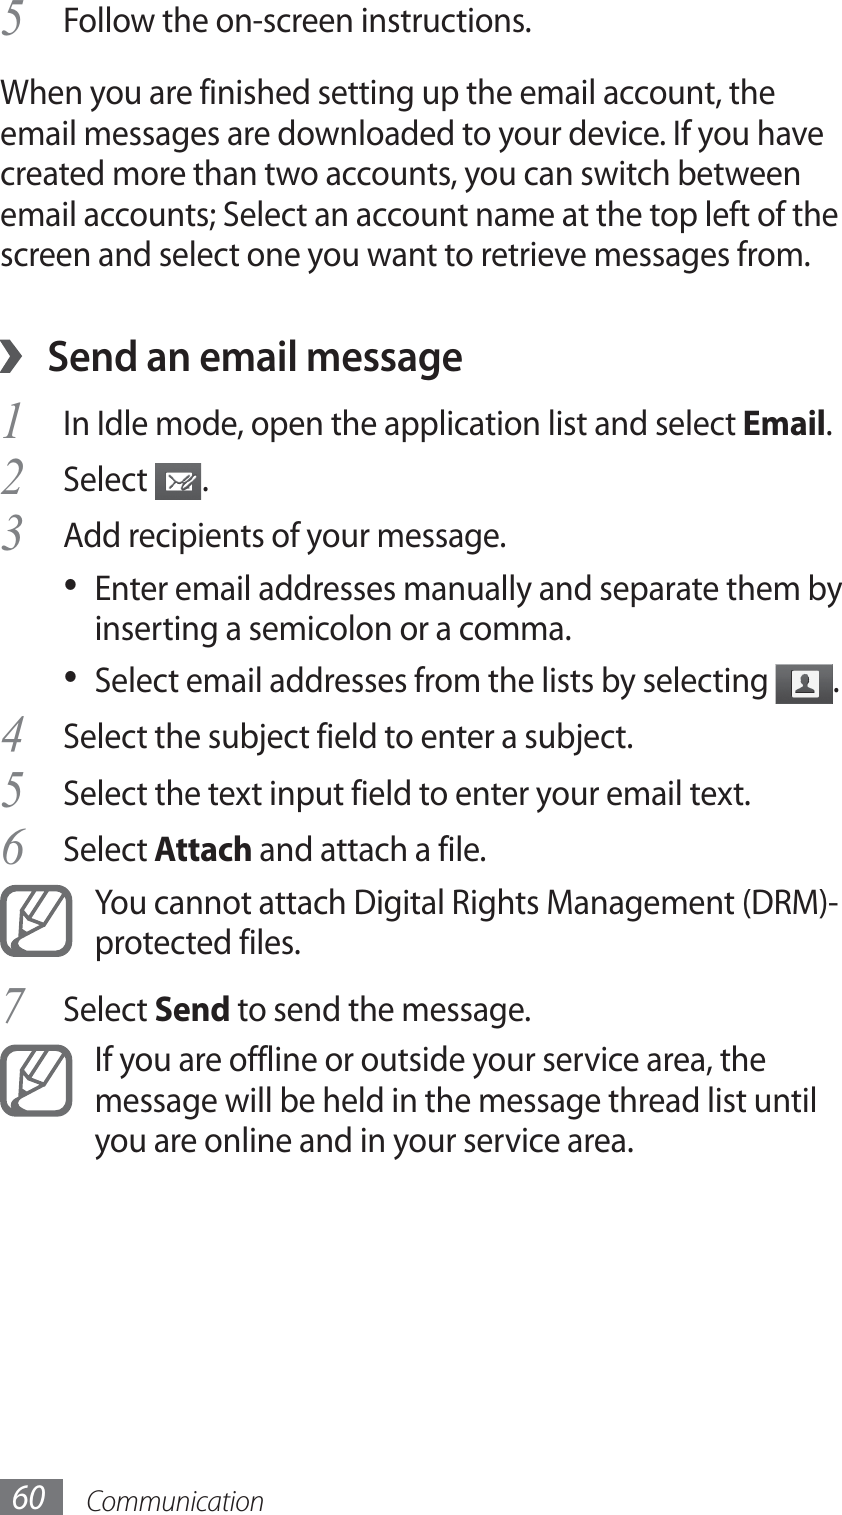 Communication60Follow the on-screen instructions.5 When you are finished setting up the email account, the email messages are downloaded to your device. If you have created more than two accounts, you can switch between email accounts; Select an account name at the top left of the screen and select one you want to retrieve messages from.Send an email message ›1 In Idle mode, open the application list and select Email.Select 2 .Add recipients of your message.3 Enter email addresses manually and separate them by • inserting a semicolon or a comma.Select email addresses from the lists by selecting •  .Select the subject field to enter a subject.4 Select the text input field to enter your email text.5 Select6  Attach and attach a file.You cannot attach Digital Rights Management (DRM)-protected files.Select 7 Send to send the message.If you are offline or outside your service area, the message will be held in the message thread list until you are online and in your service area.